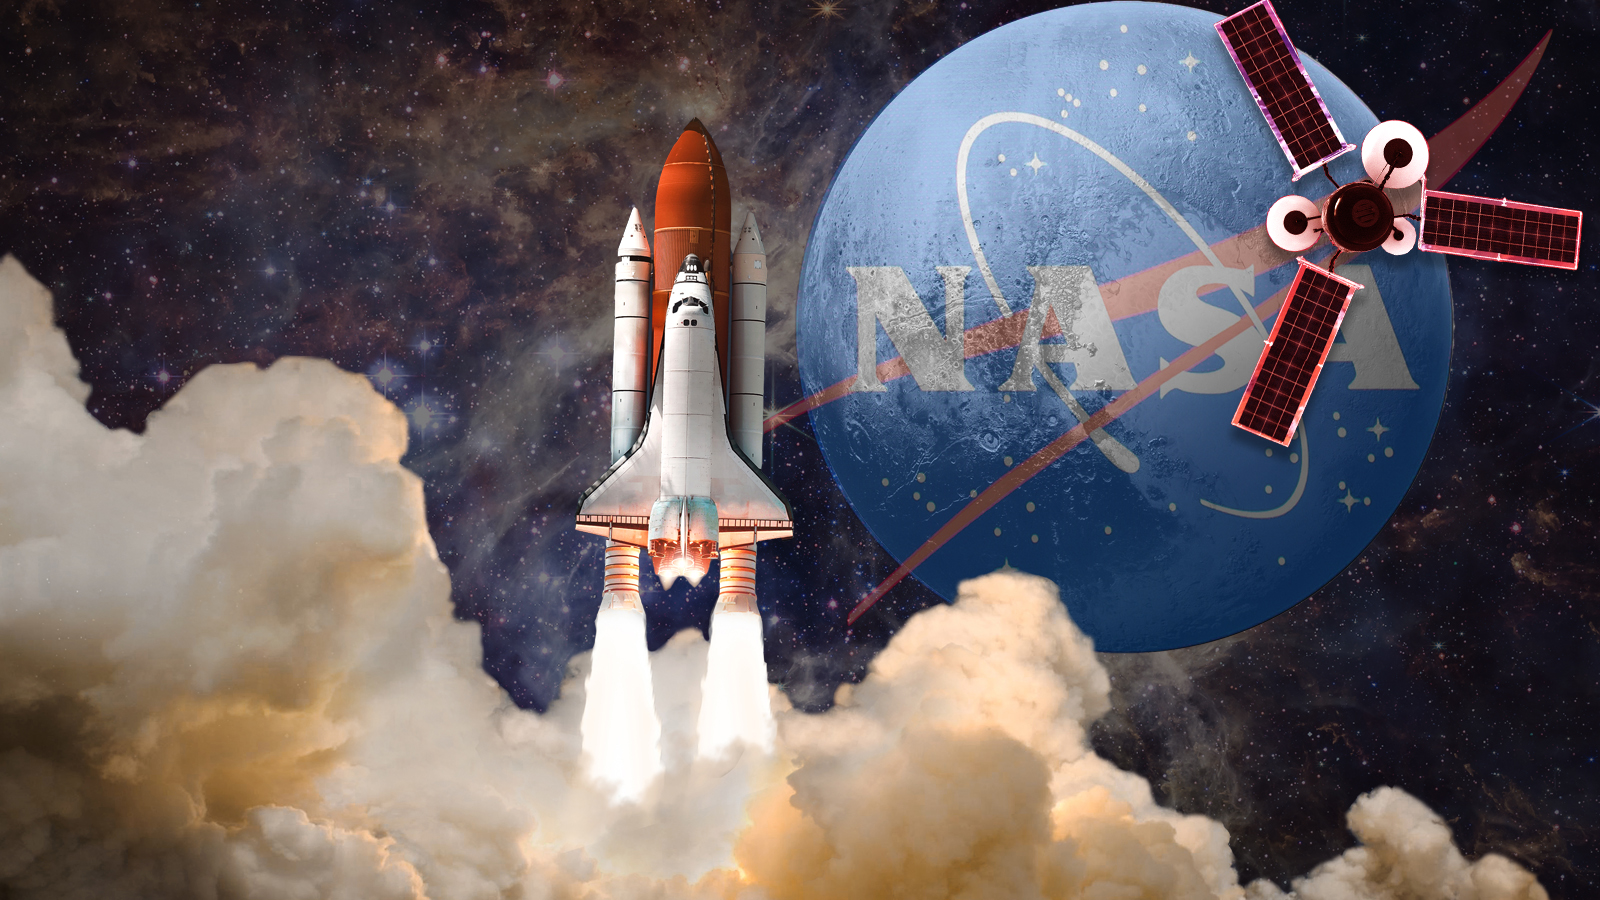 NASA news: the latest discoveries, projects and expeditions